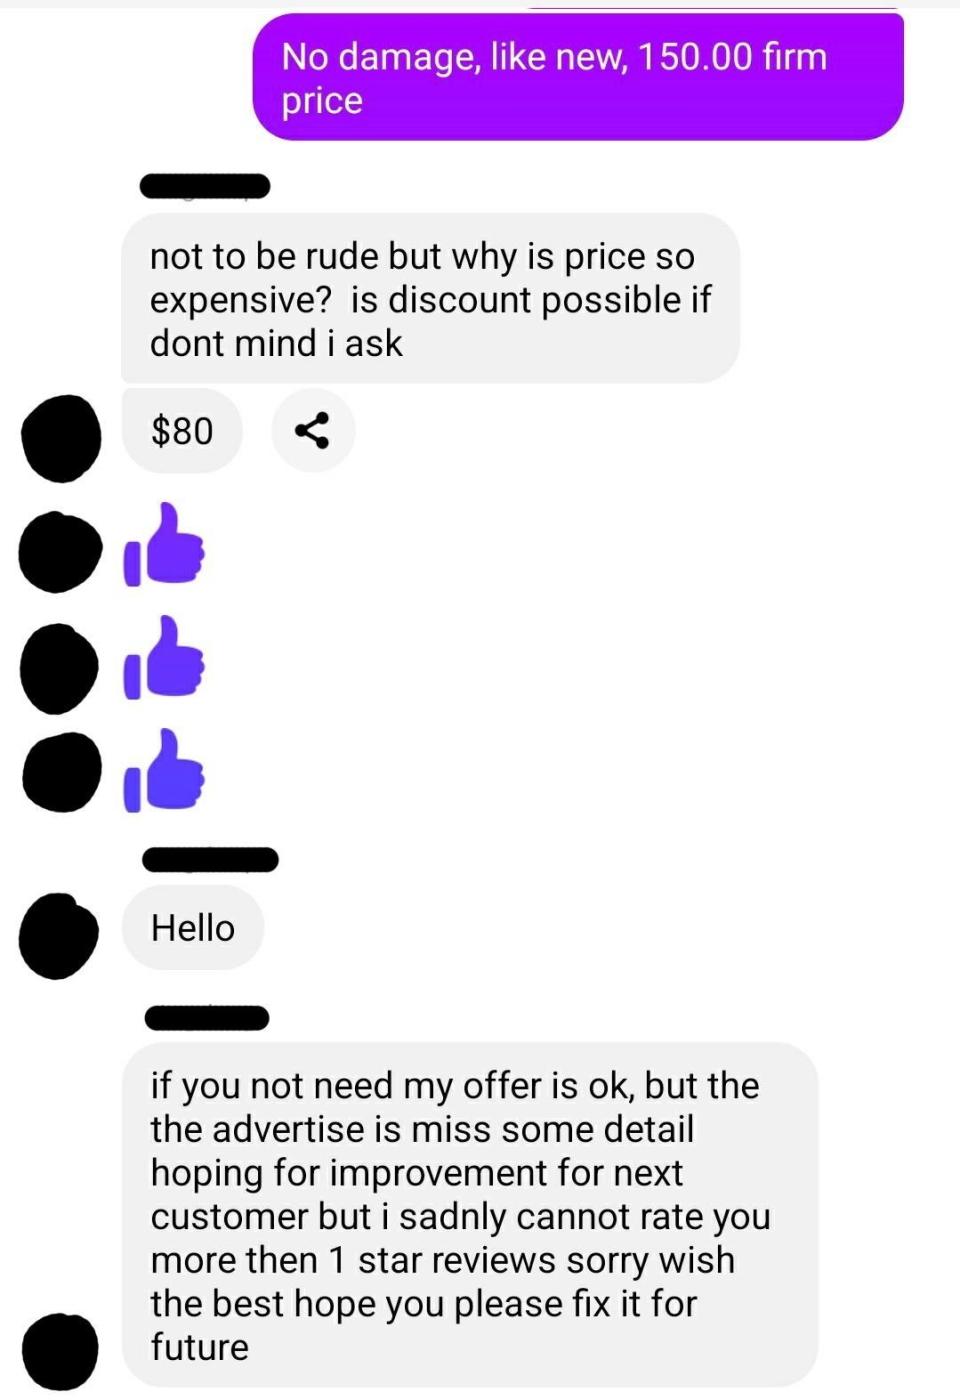 "if you not need my offer is ok, but the the advertise is miss some detail hoping for improvement for next customer but i sadnly cannot rate you more then 1 star reviews sorry"